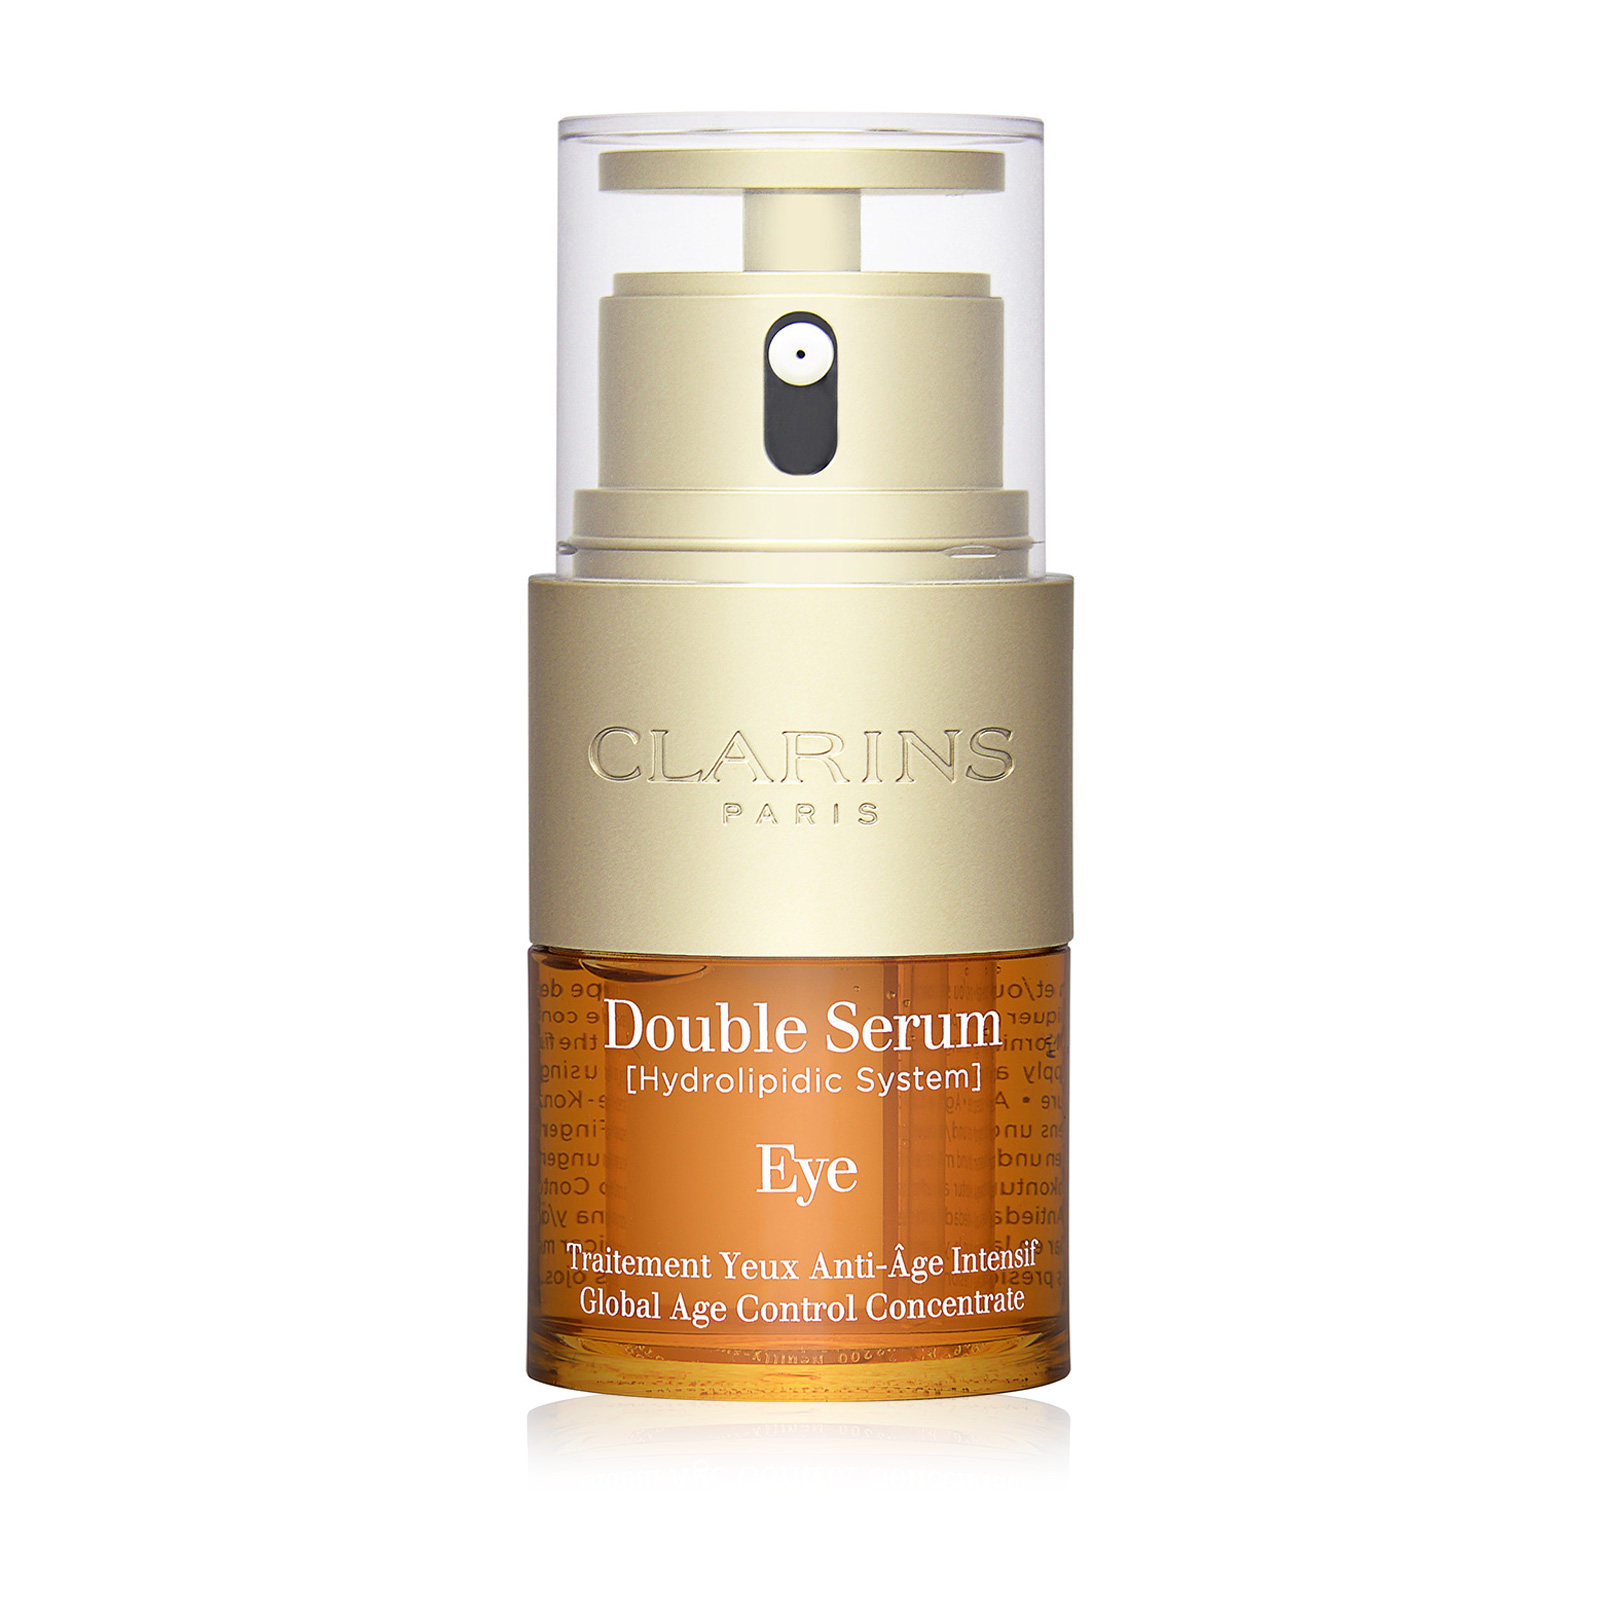 Double Serum (Hydrolipidic System) Eye Global Age Control Concentrate